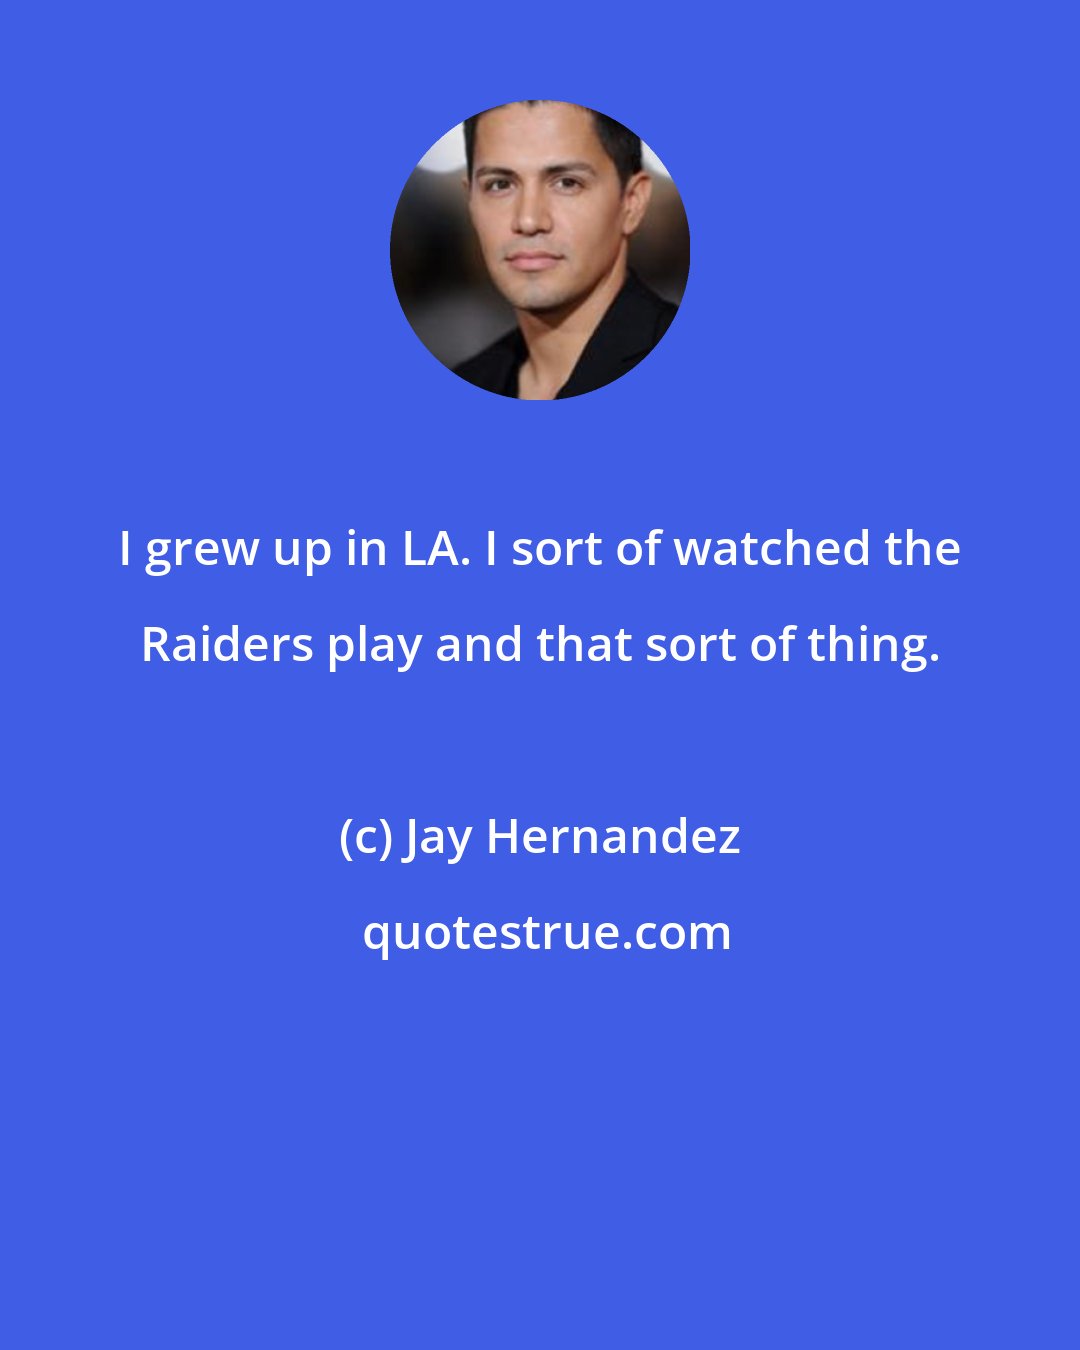 Jay Hernandez: I grew up in LA. I sort of watched the Raiders play and that sort of thing.